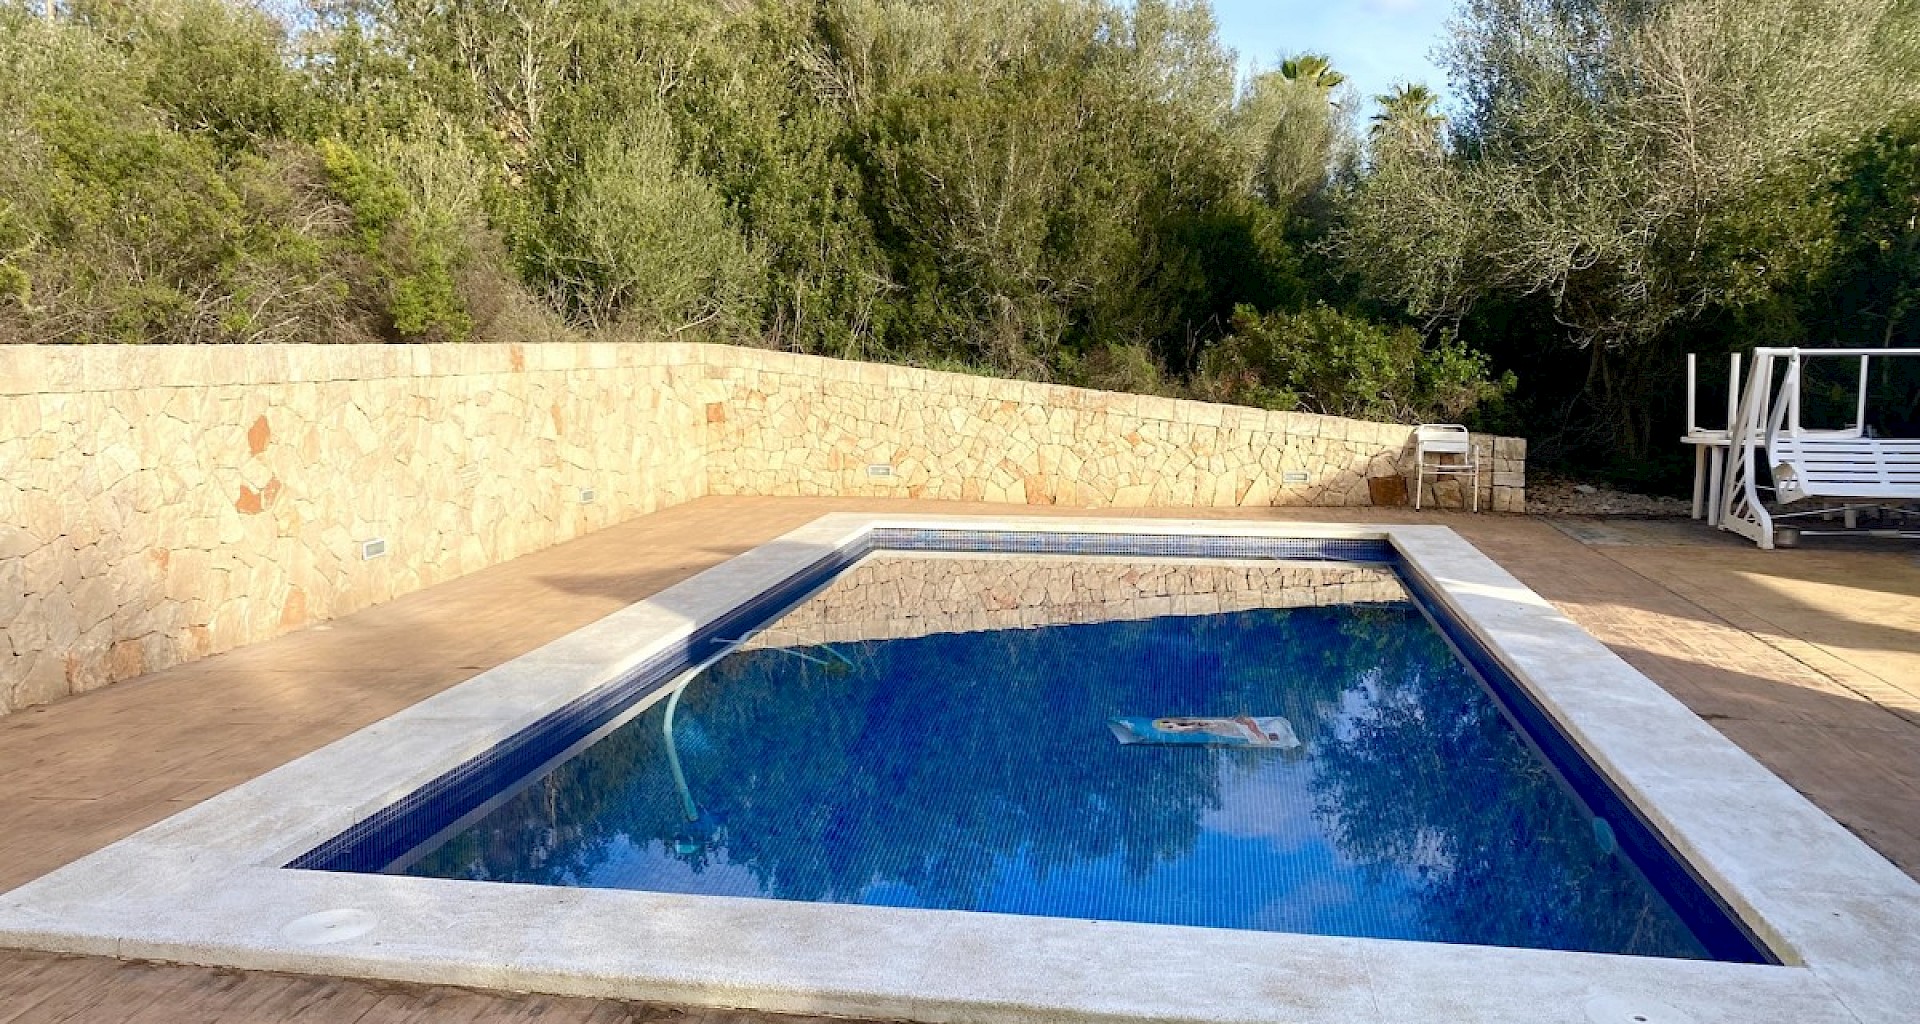 KROHN & LUEDEMANN High quality finca in Puntiro with pool and large plot 